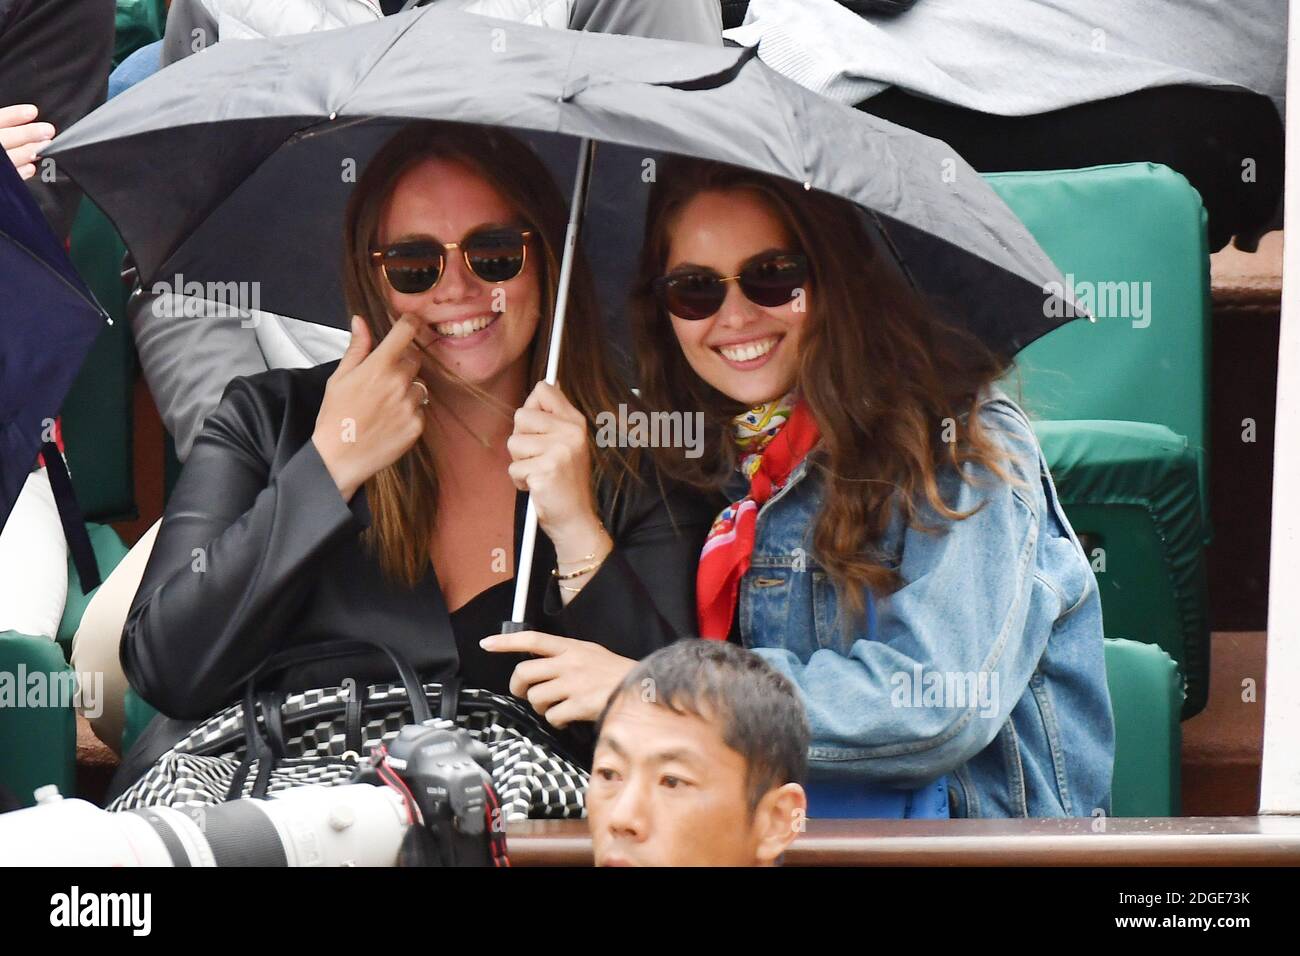 Actress Noemie Merlant and her boyfriend attend the 2017 French Tennis Open  at Roland Garros on June 6, 2017 in Paris, France. Photo by Laurent  Zabulon/ABACAPRESS.COM Stock Photo - Alamy